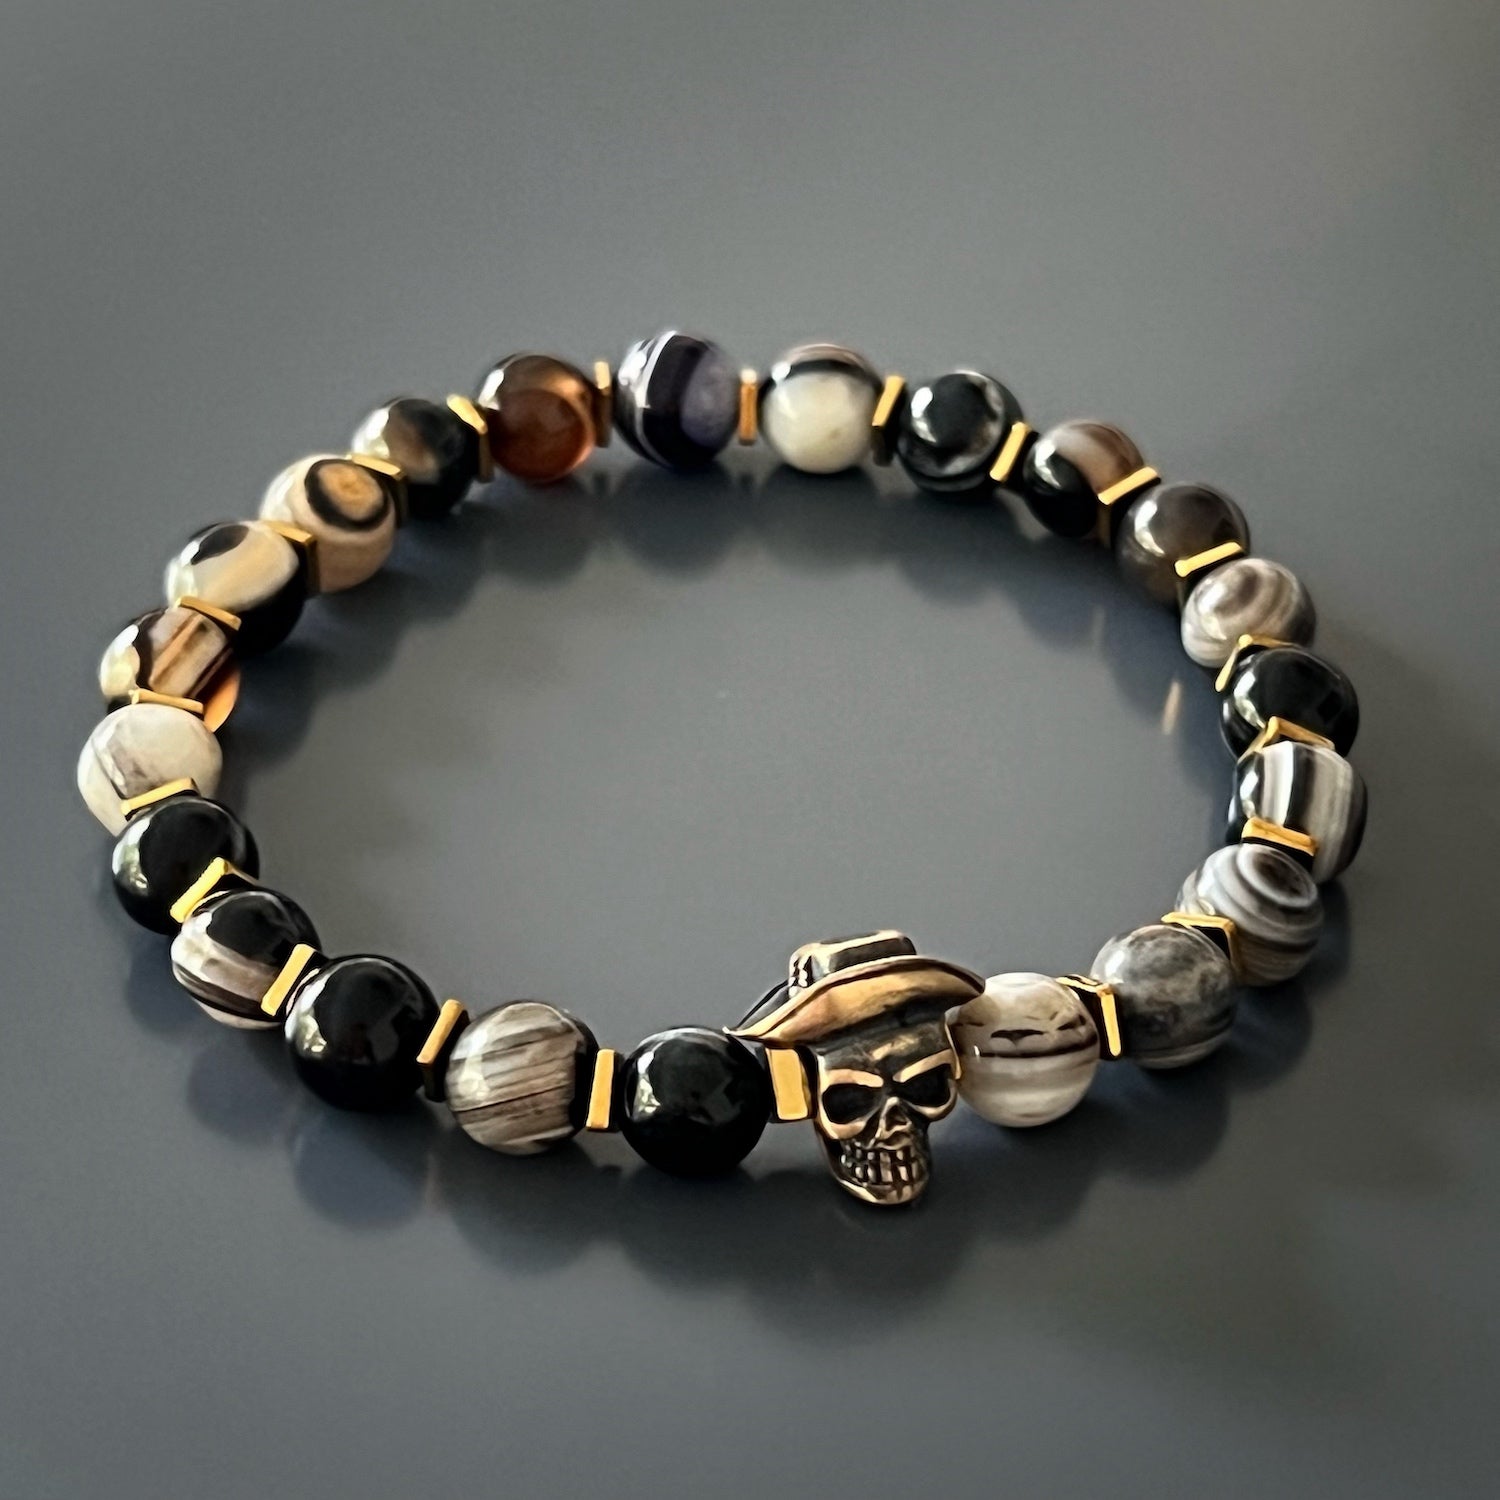 The Cowboy Hat Skull Agate Bracelet features bold and unique Agate stone beads, gold hematite stone spacers, and a bronze skull charm in the shape of a cowboy hat. Handcrafted with care, this bracelet is a one-of-a-kind piece that makes a statement.